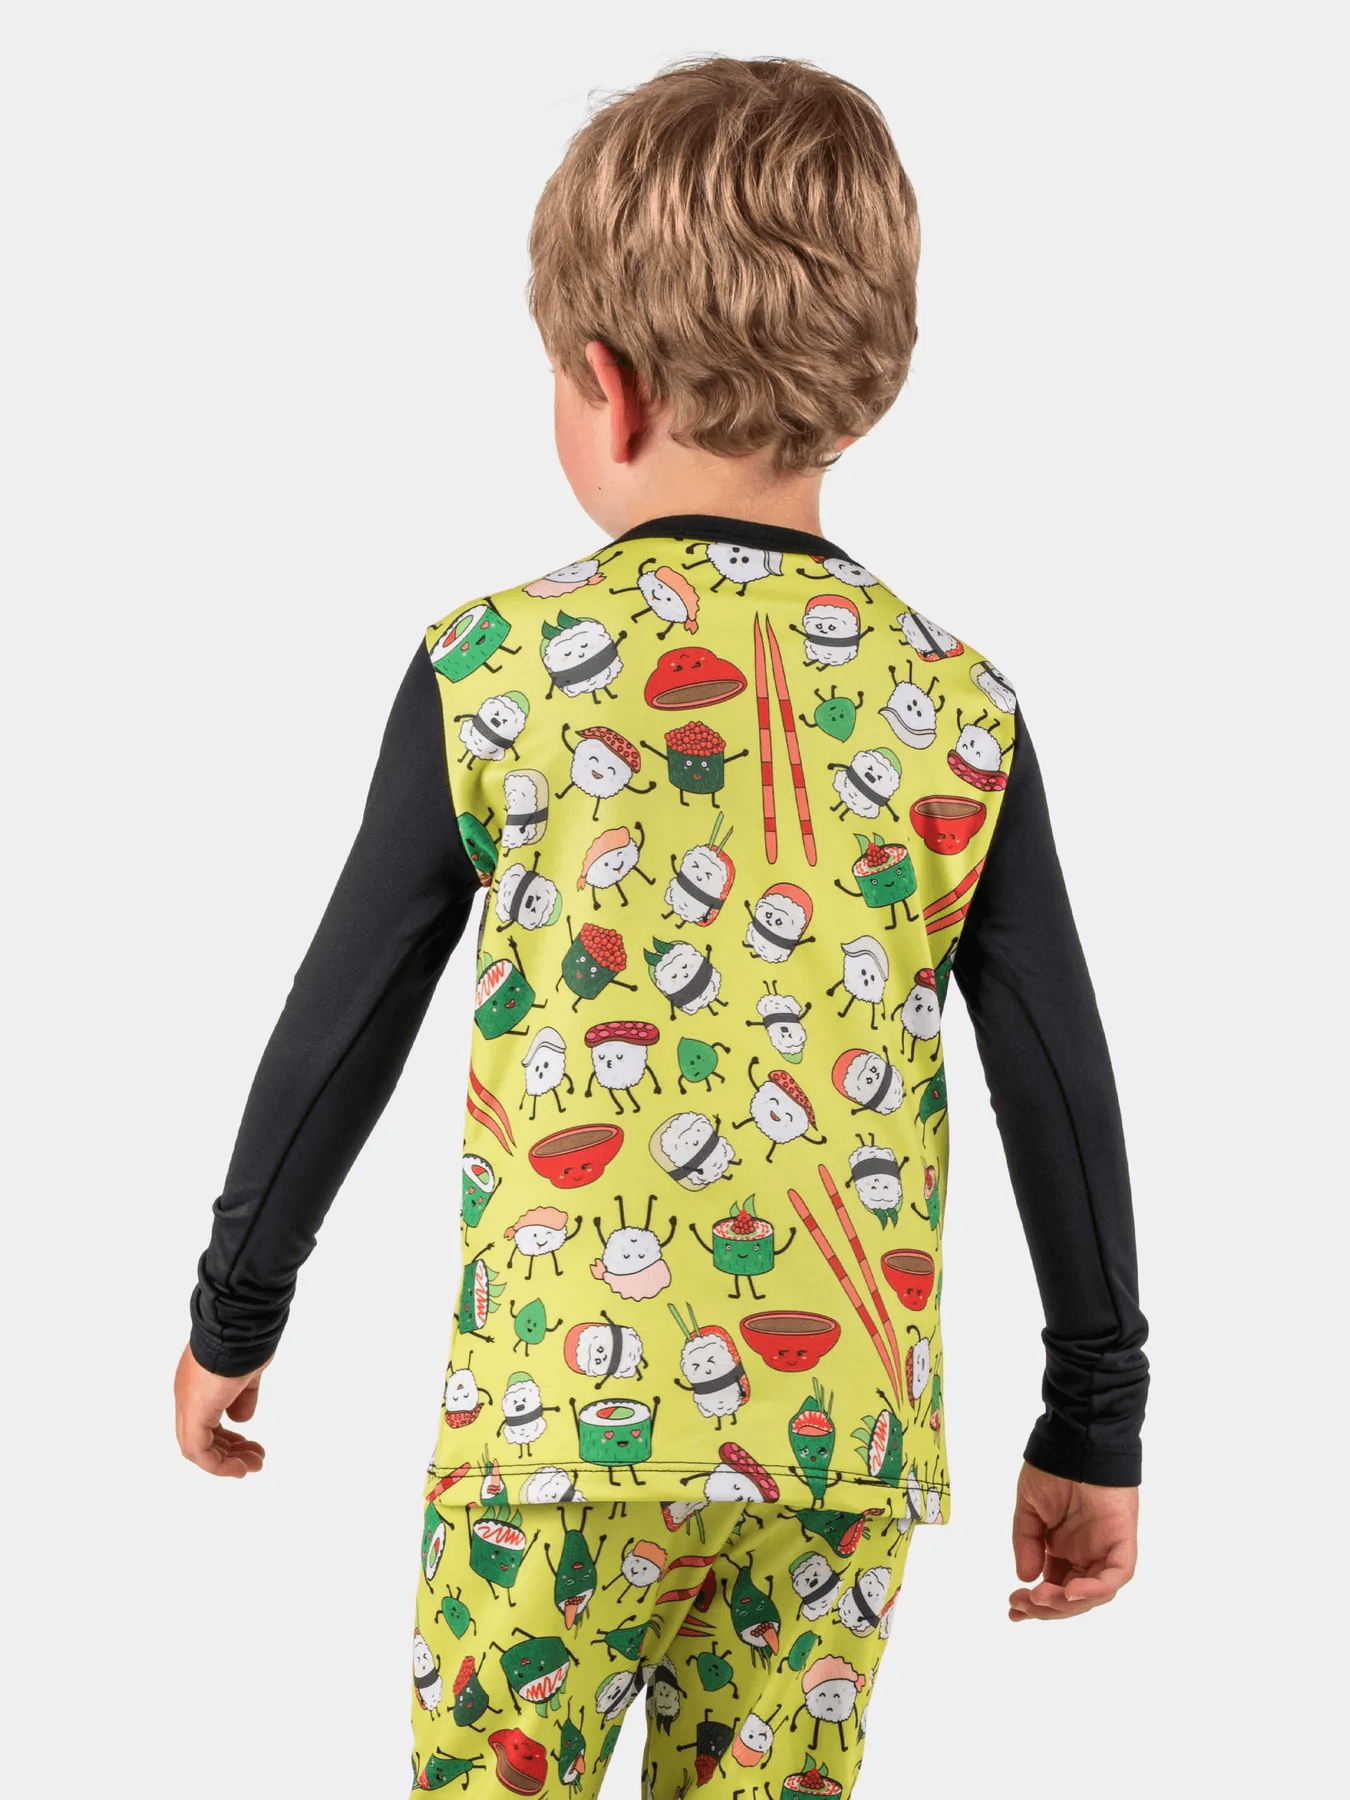 Blackstrap Kids Therma M/W Base Layer Crew 2022 - Mountain Kids Outfitters: Sushi Wasabi, Back View